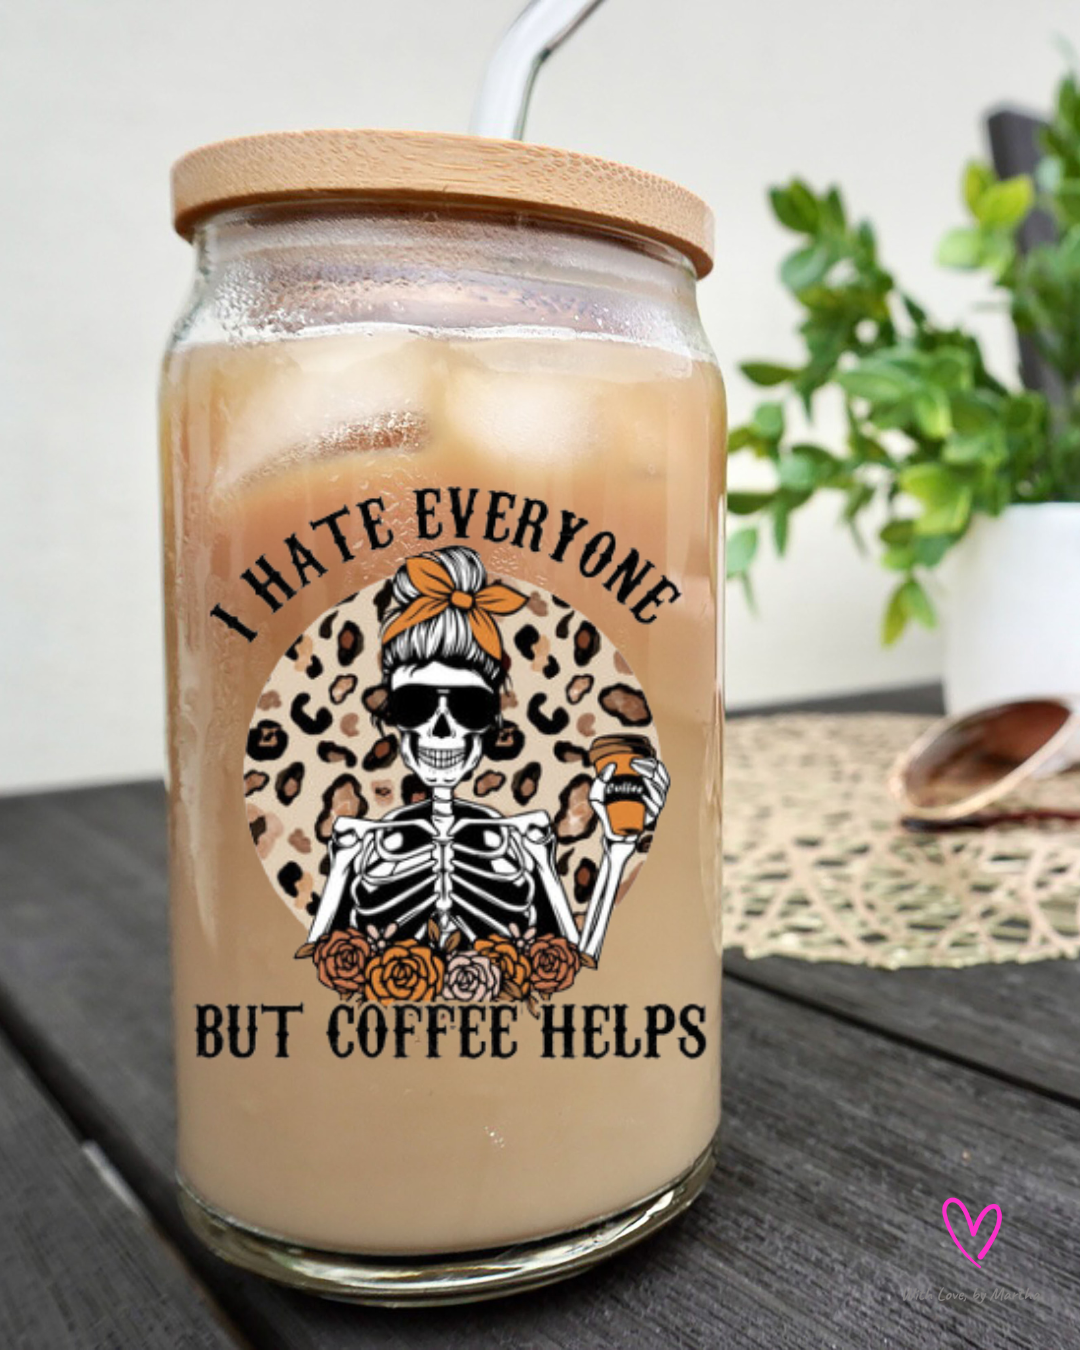 "I hate everything but coffee helps" Glass cup 16oz